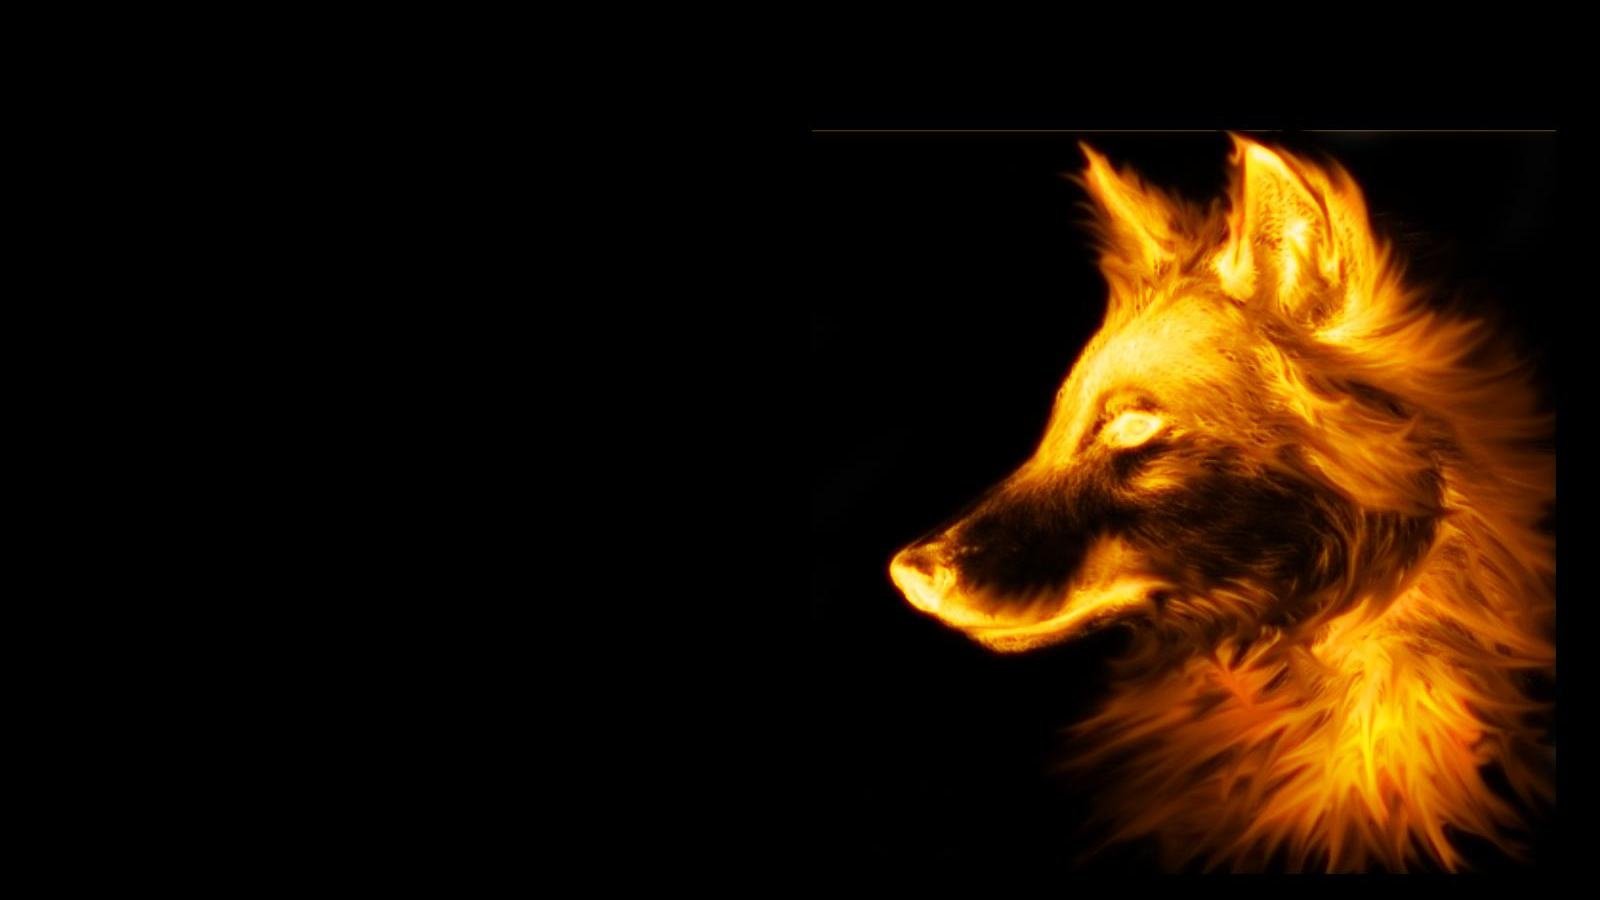 Wallpapers Backgrounds   Fire wallpaper wolf black background 1600x900